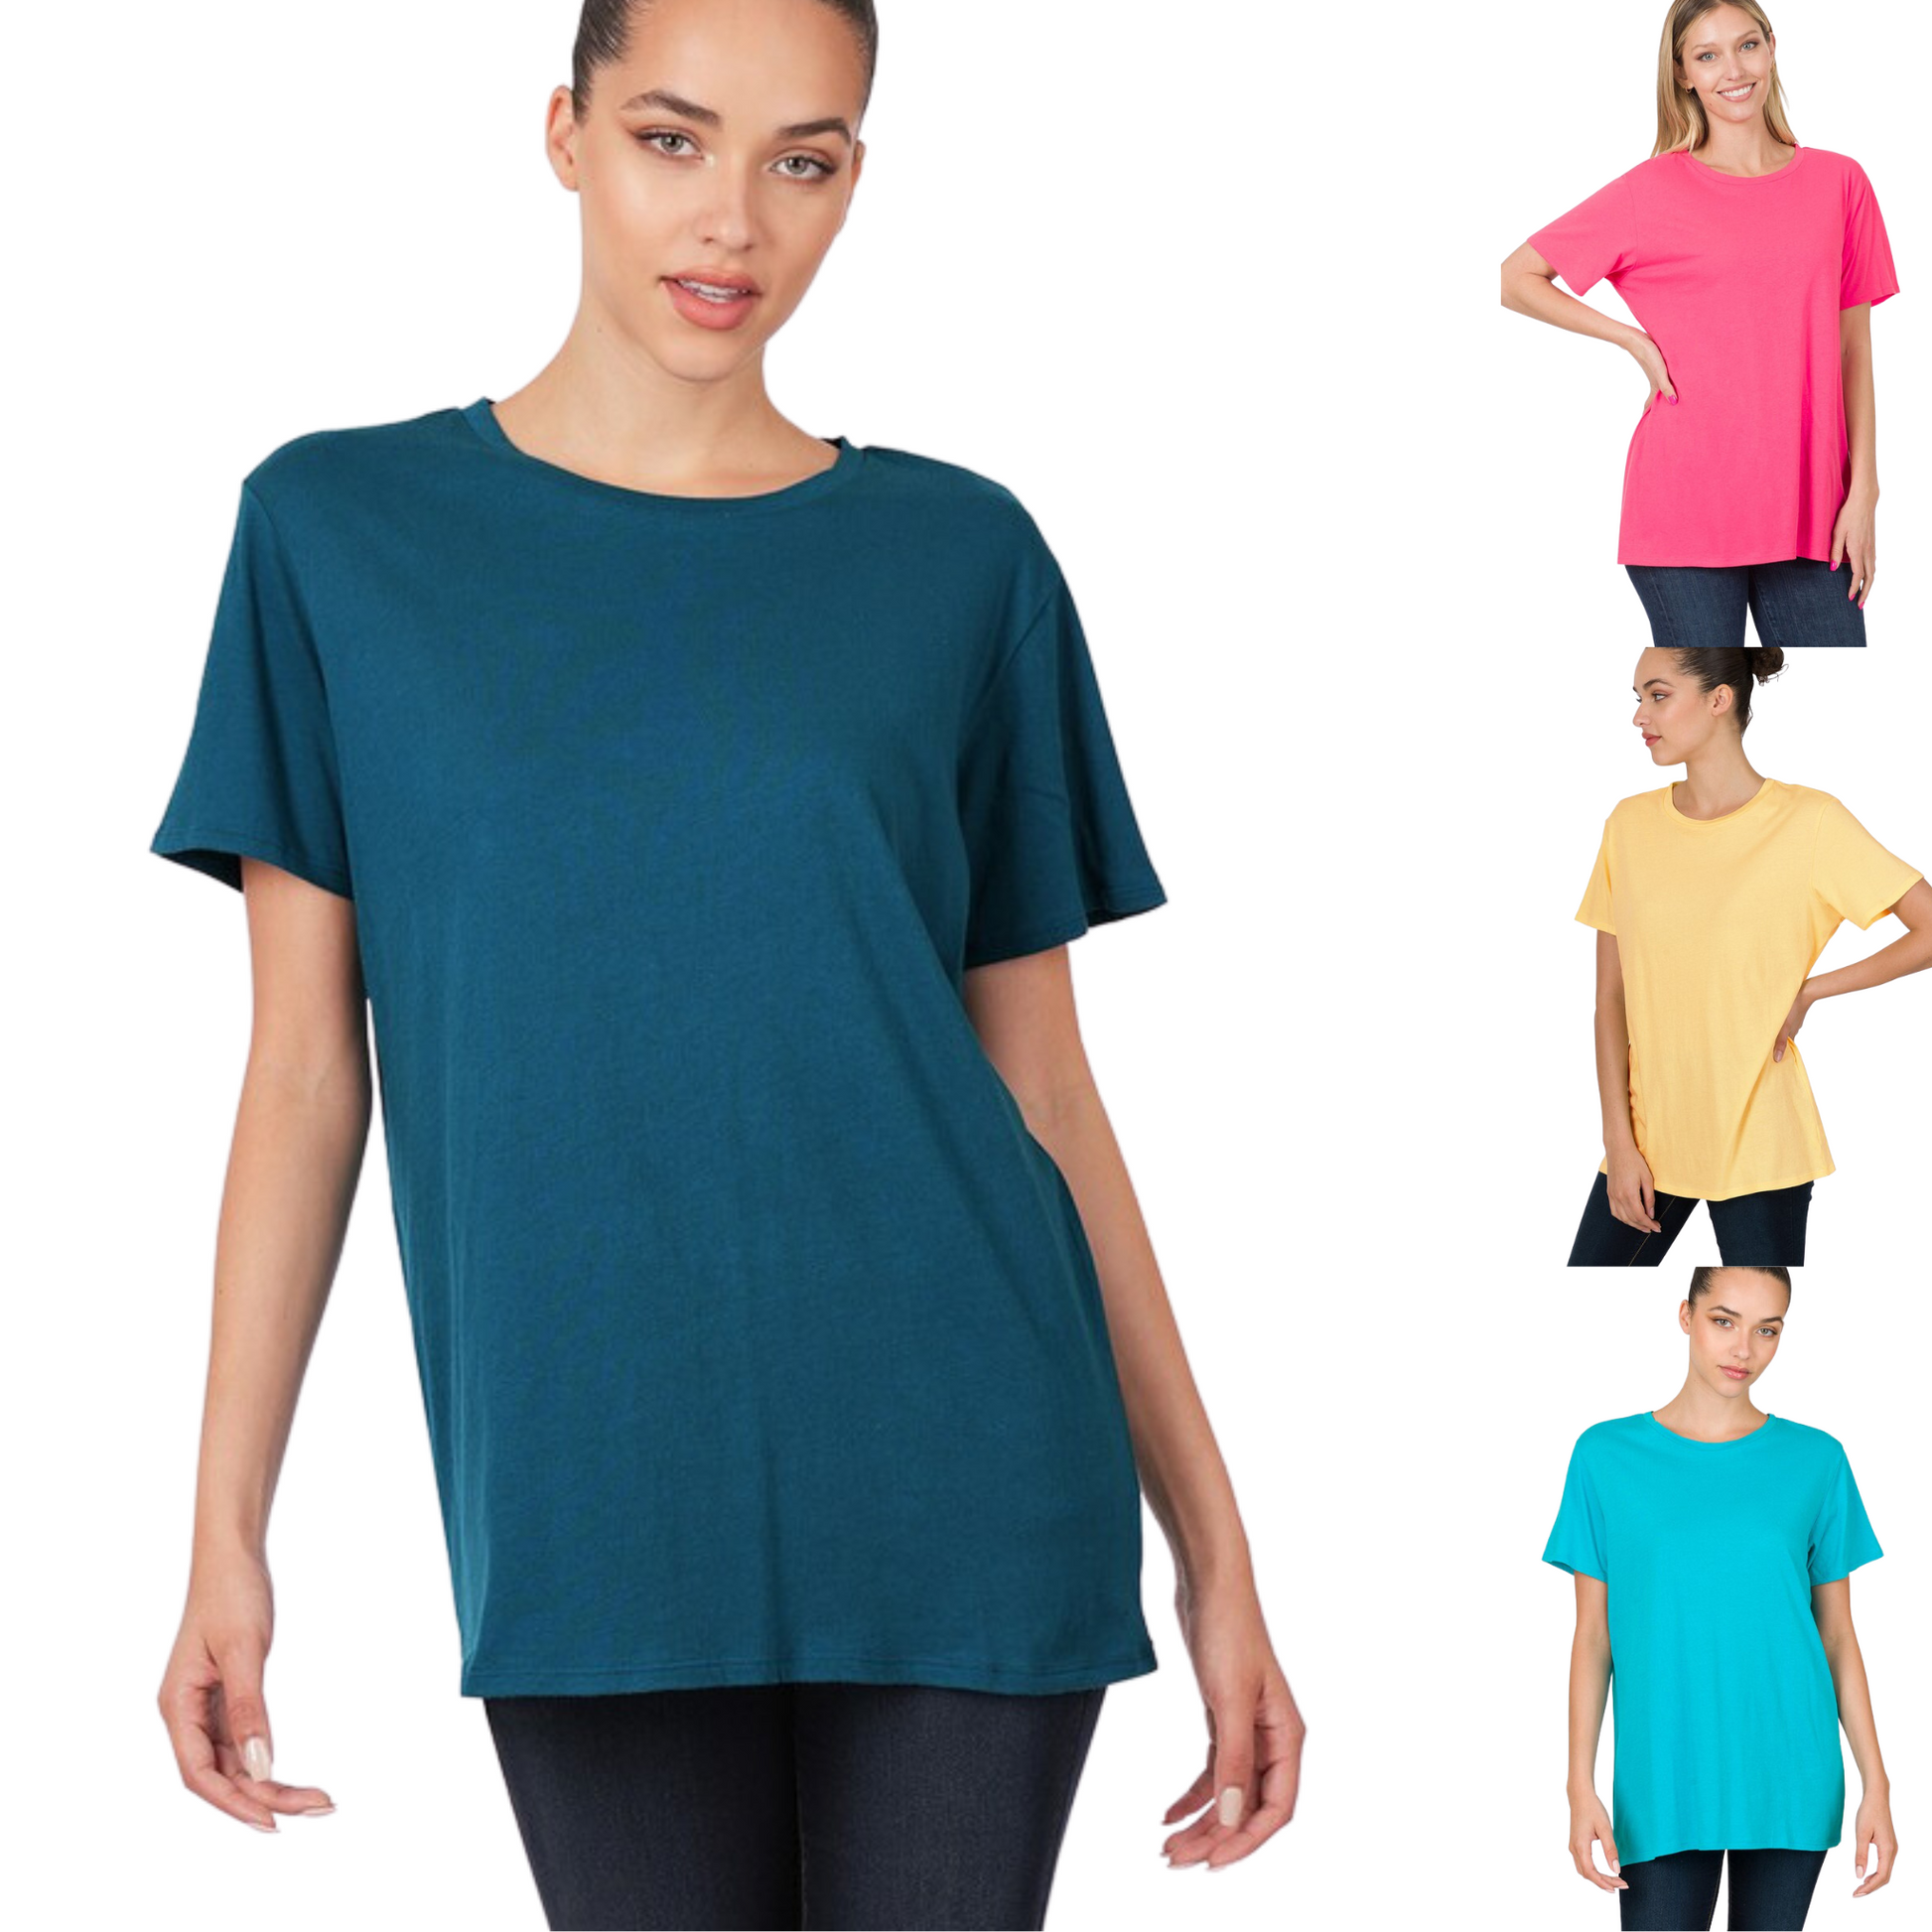 Featuring a basic round neck design, the Boyfriend Round Neck Tee is crafted from soft cotton and comes in four eye-catching colors: teal, ice blue, fuchsia and banana. Its relaxed fit makes it a versatile piece that works perfectly both in casual and dressier settings